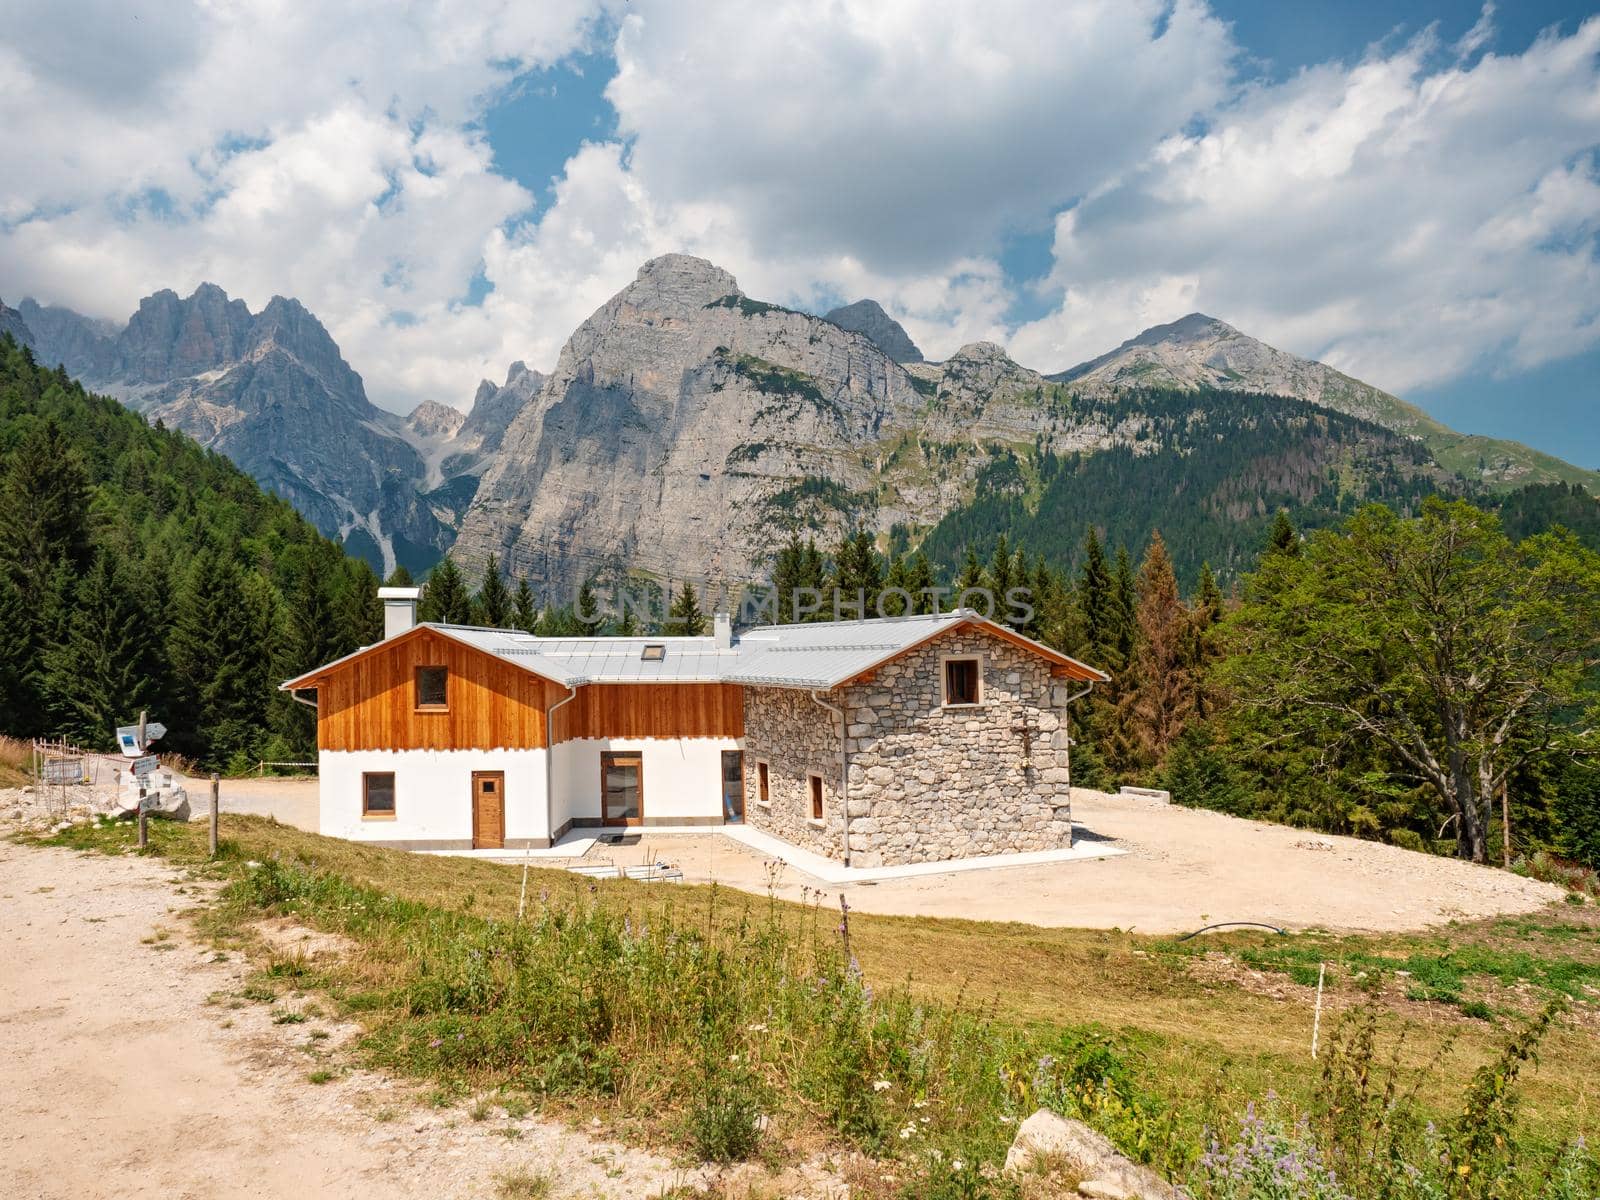 Mountain cottage panorama and Croz of the Altissimo mountain, Croz dell'Altissimo. Molveno, region Trentino, Italy . 